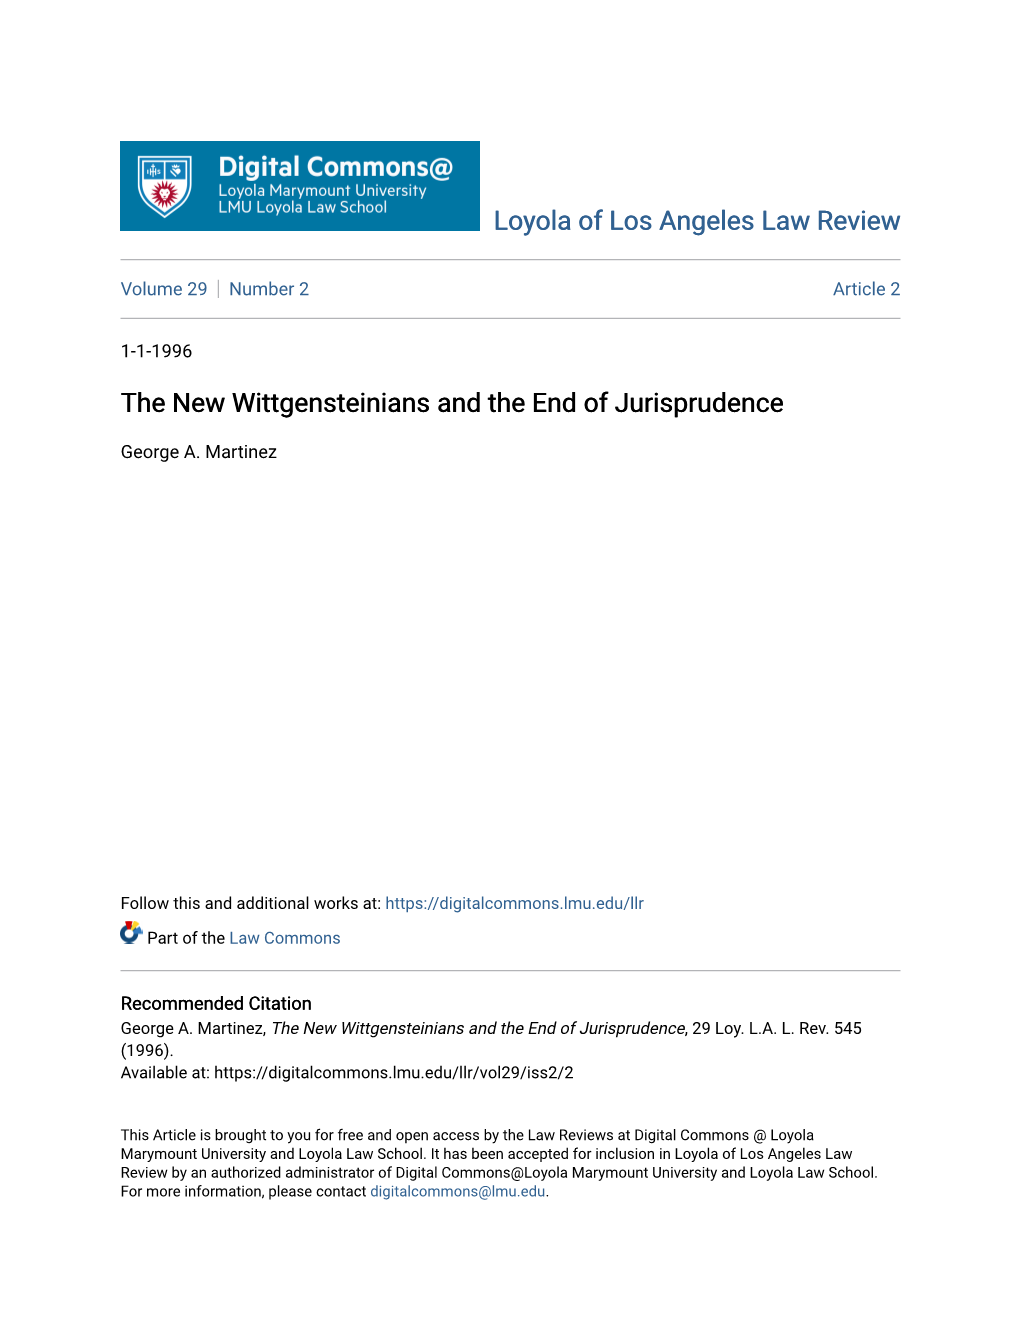 The New Wittgensteinians and the End of Jurisprudence